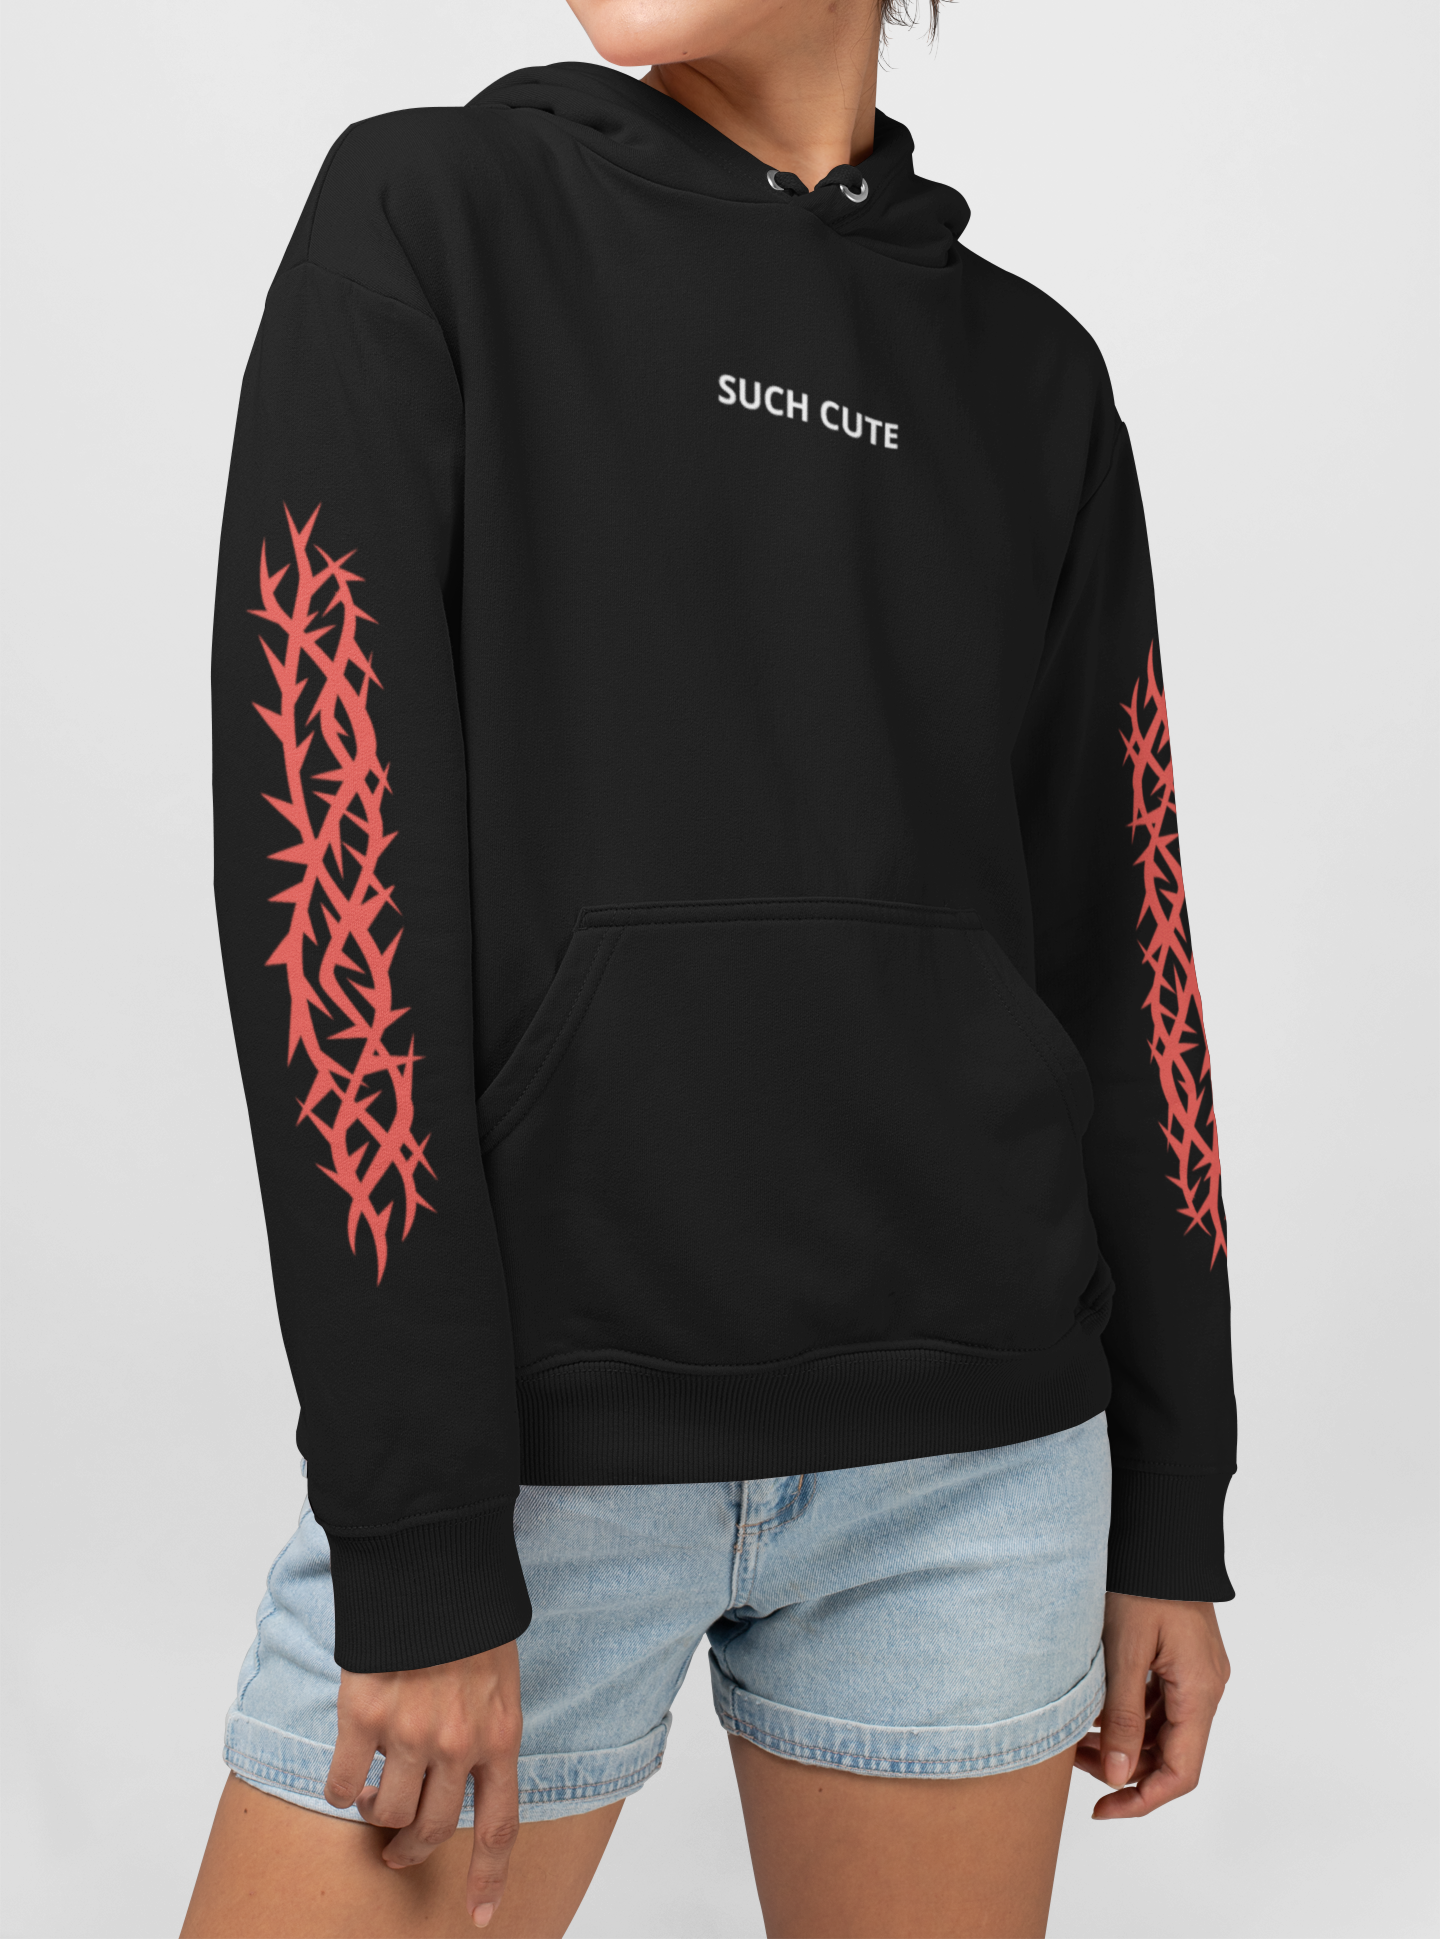 Such Cute, Unisex Aesthetic Hoodie, Aesthetic Clothing, Barbed Wire, Roses, Thorns